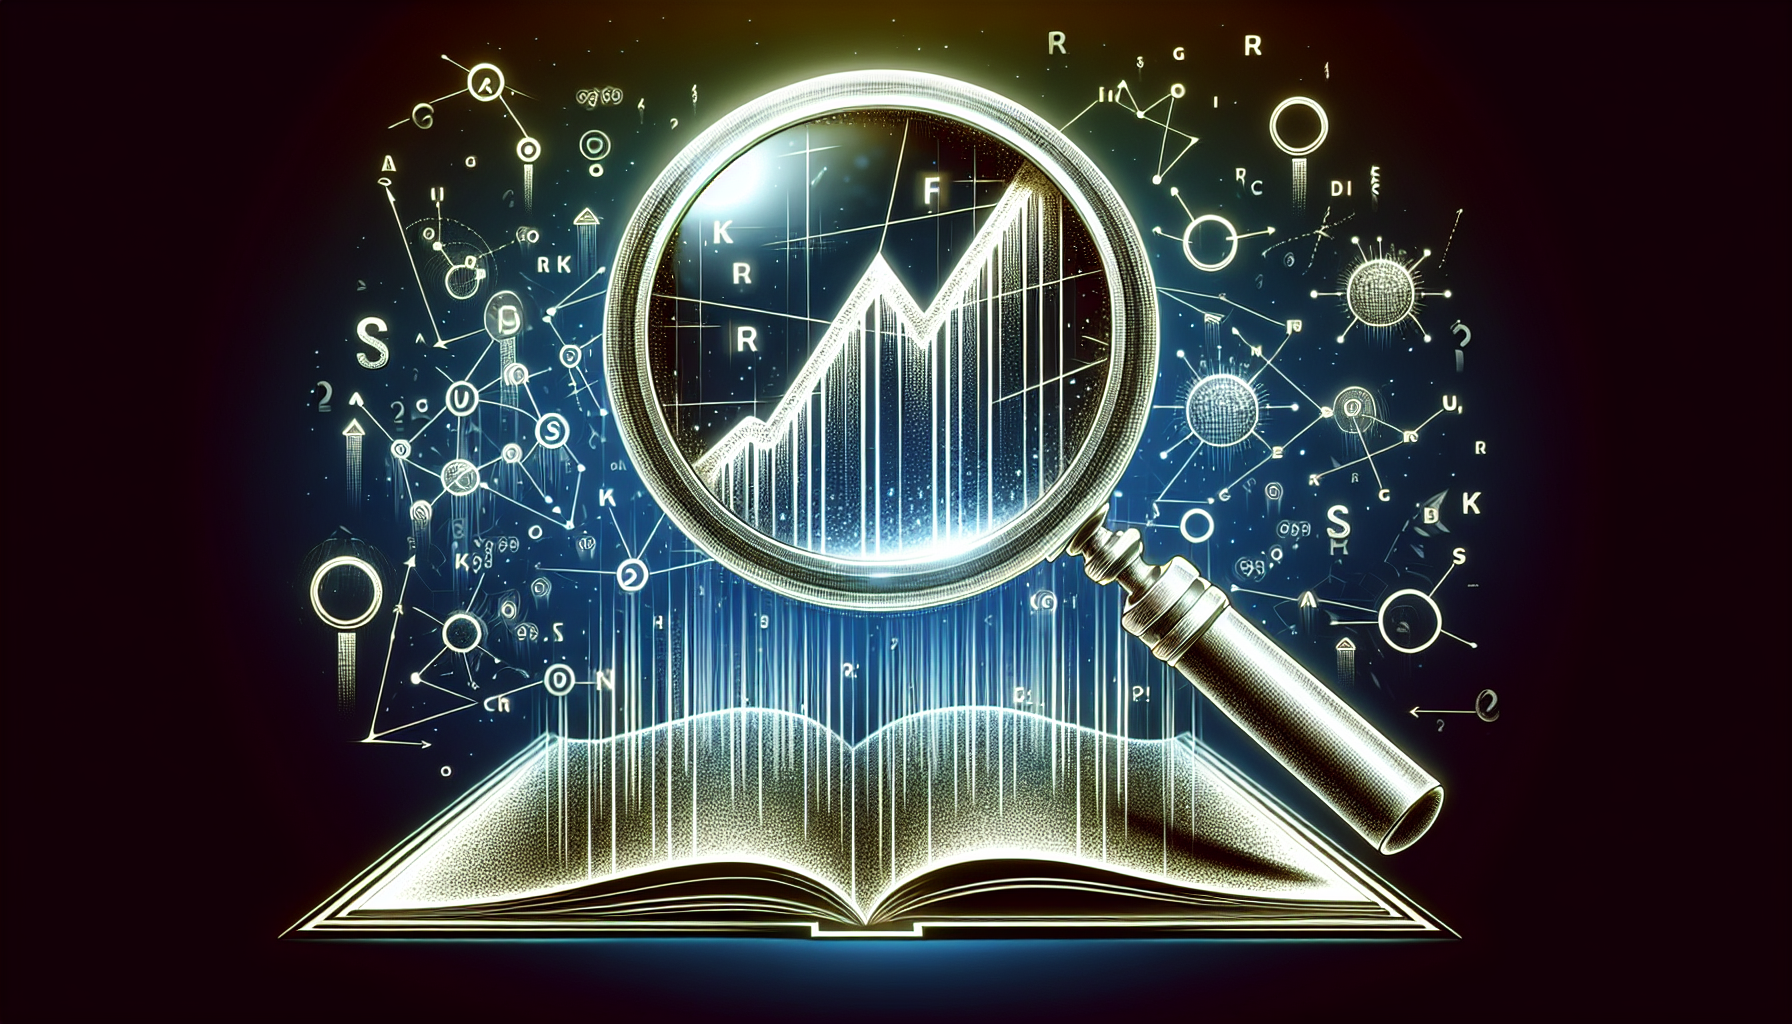 Illustration of a magnifying glass over a keyword rankings chart